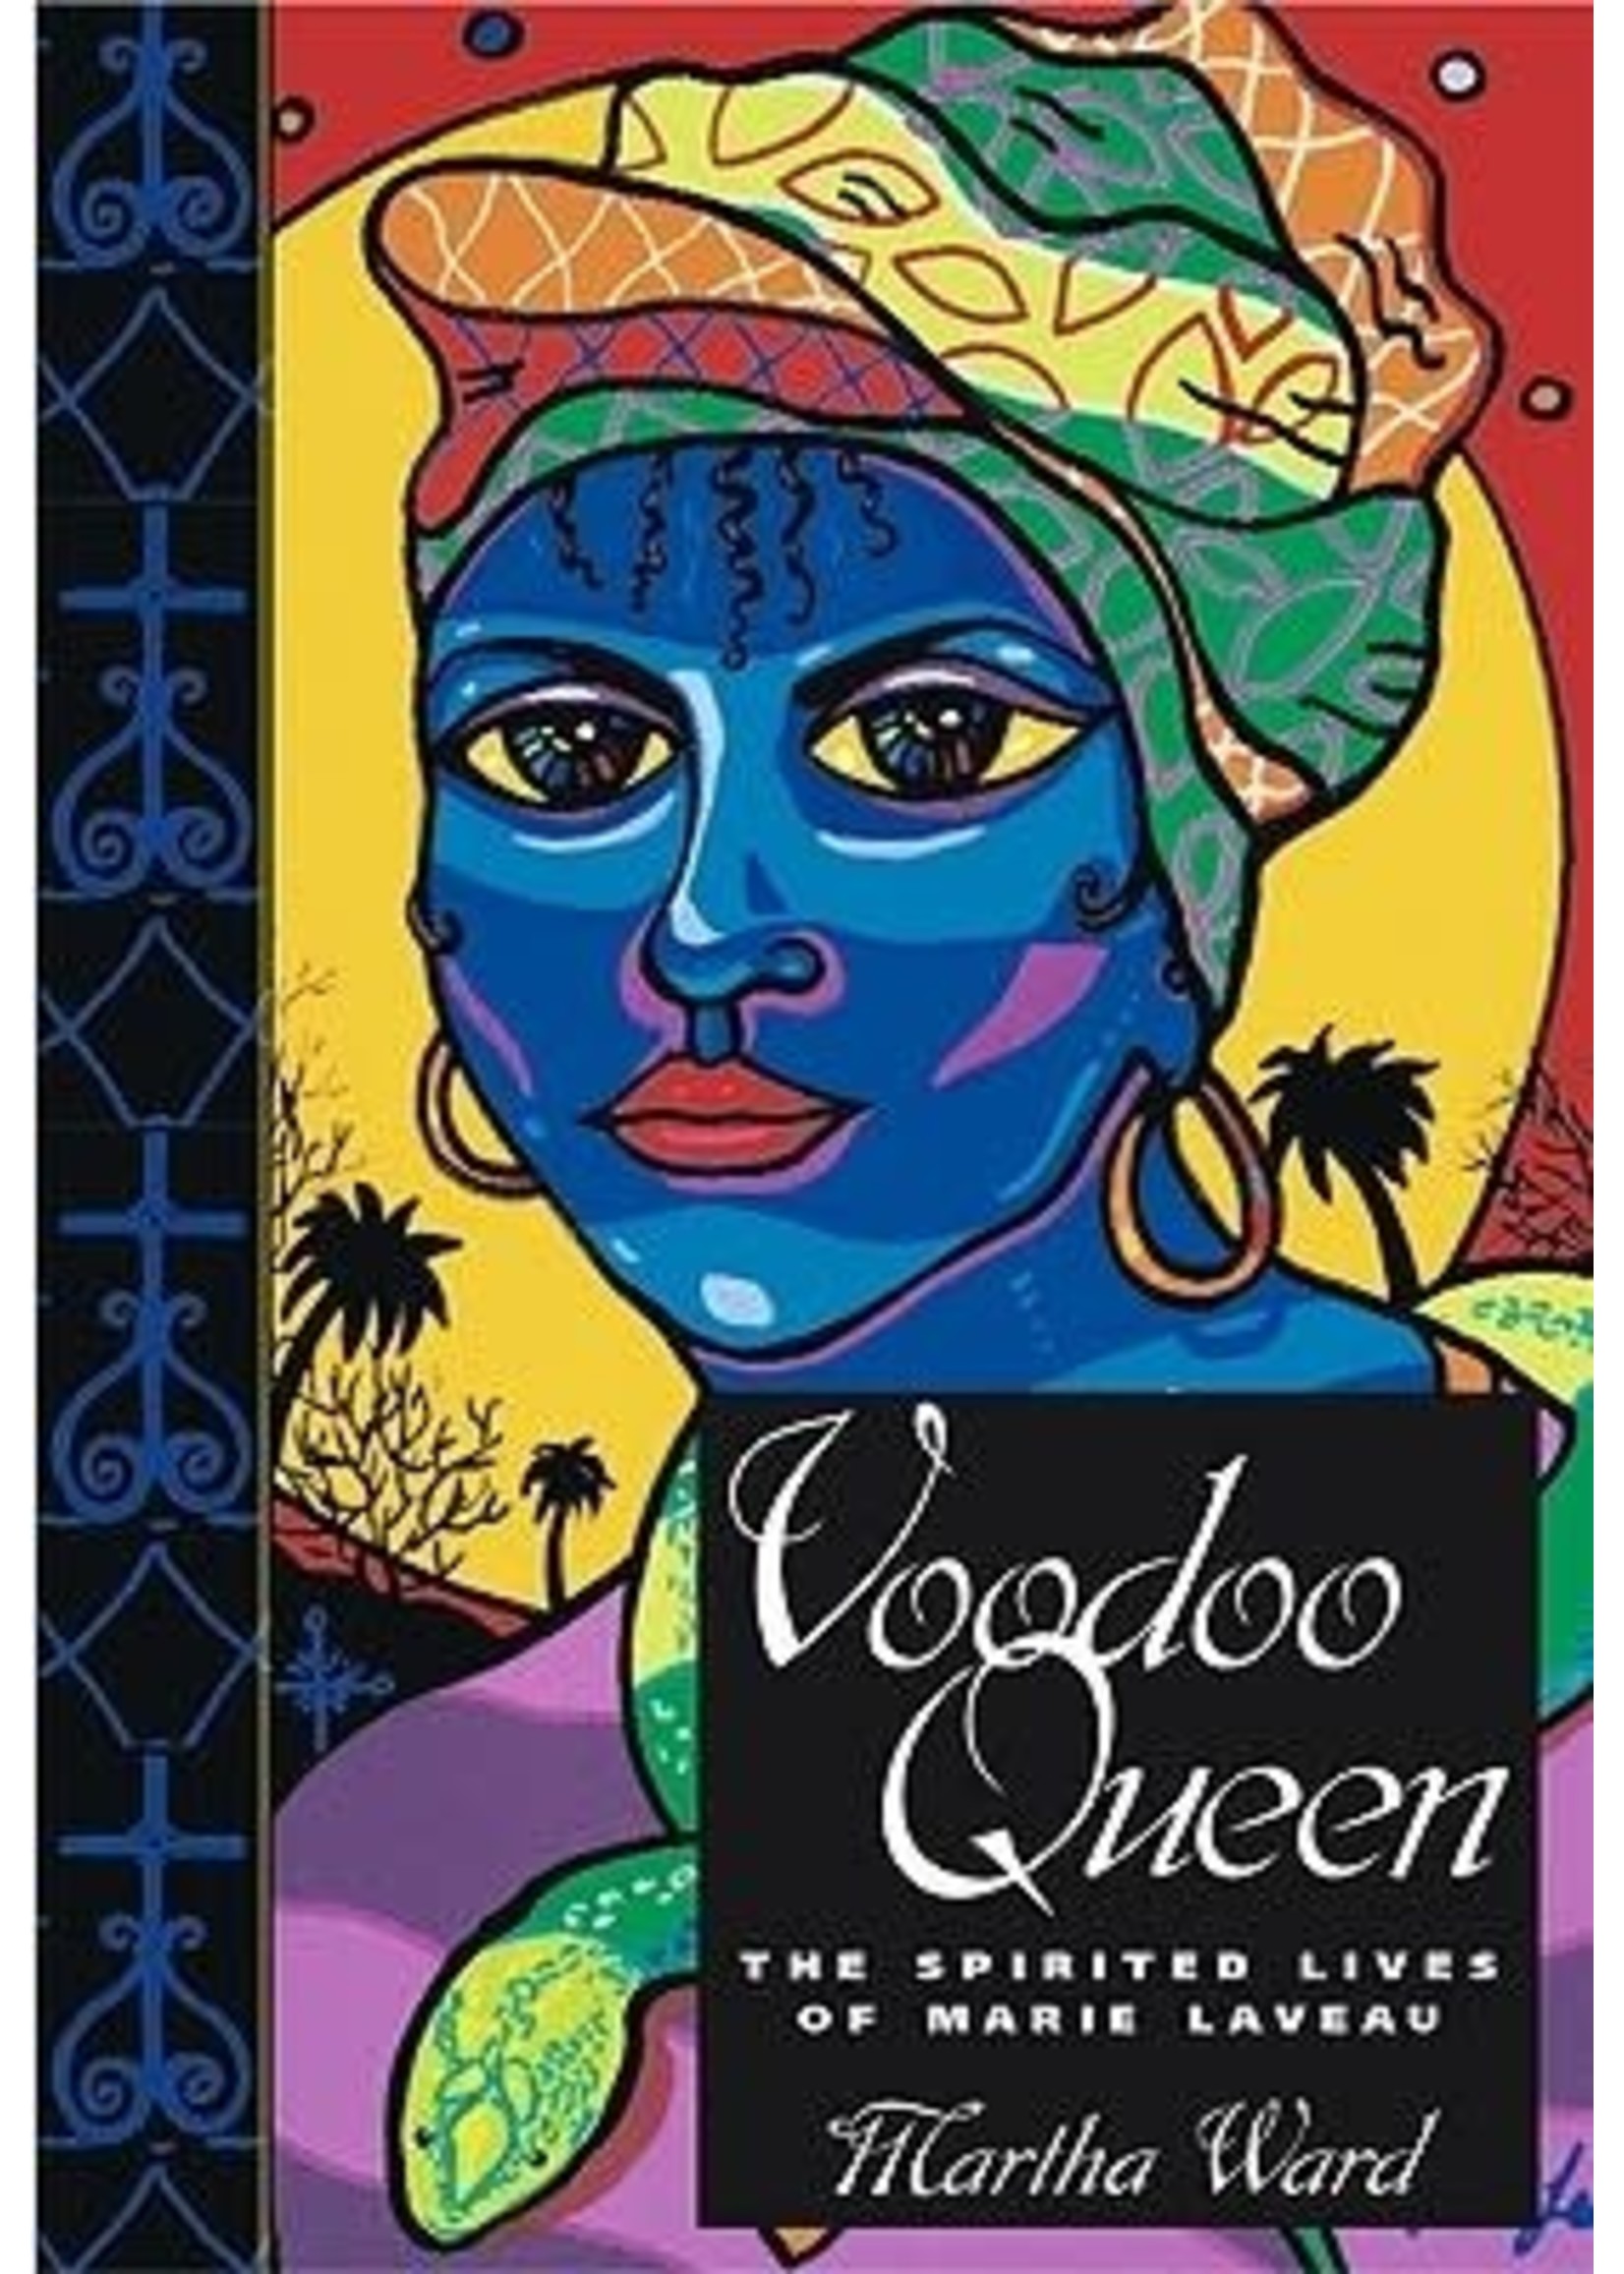 Voodoo Queen: The Spirited Lives of Marie Laveau by Martha Ward